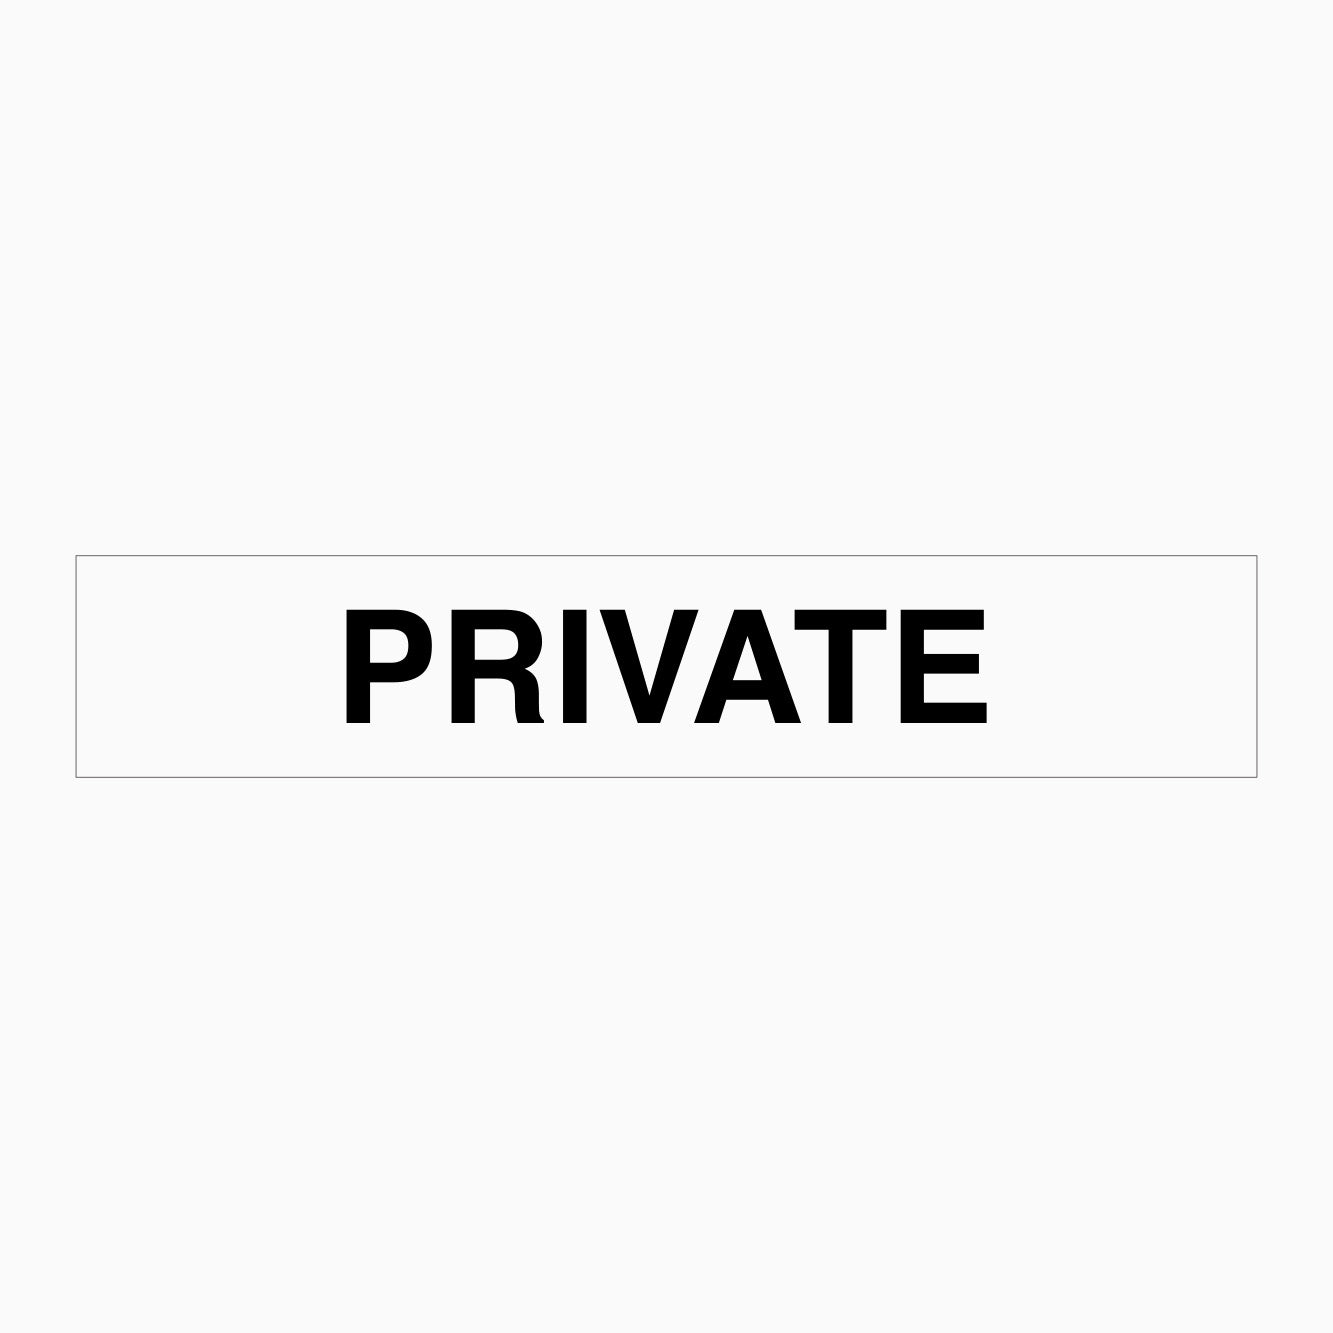 PRIVATE SIGN - GET SIGNS